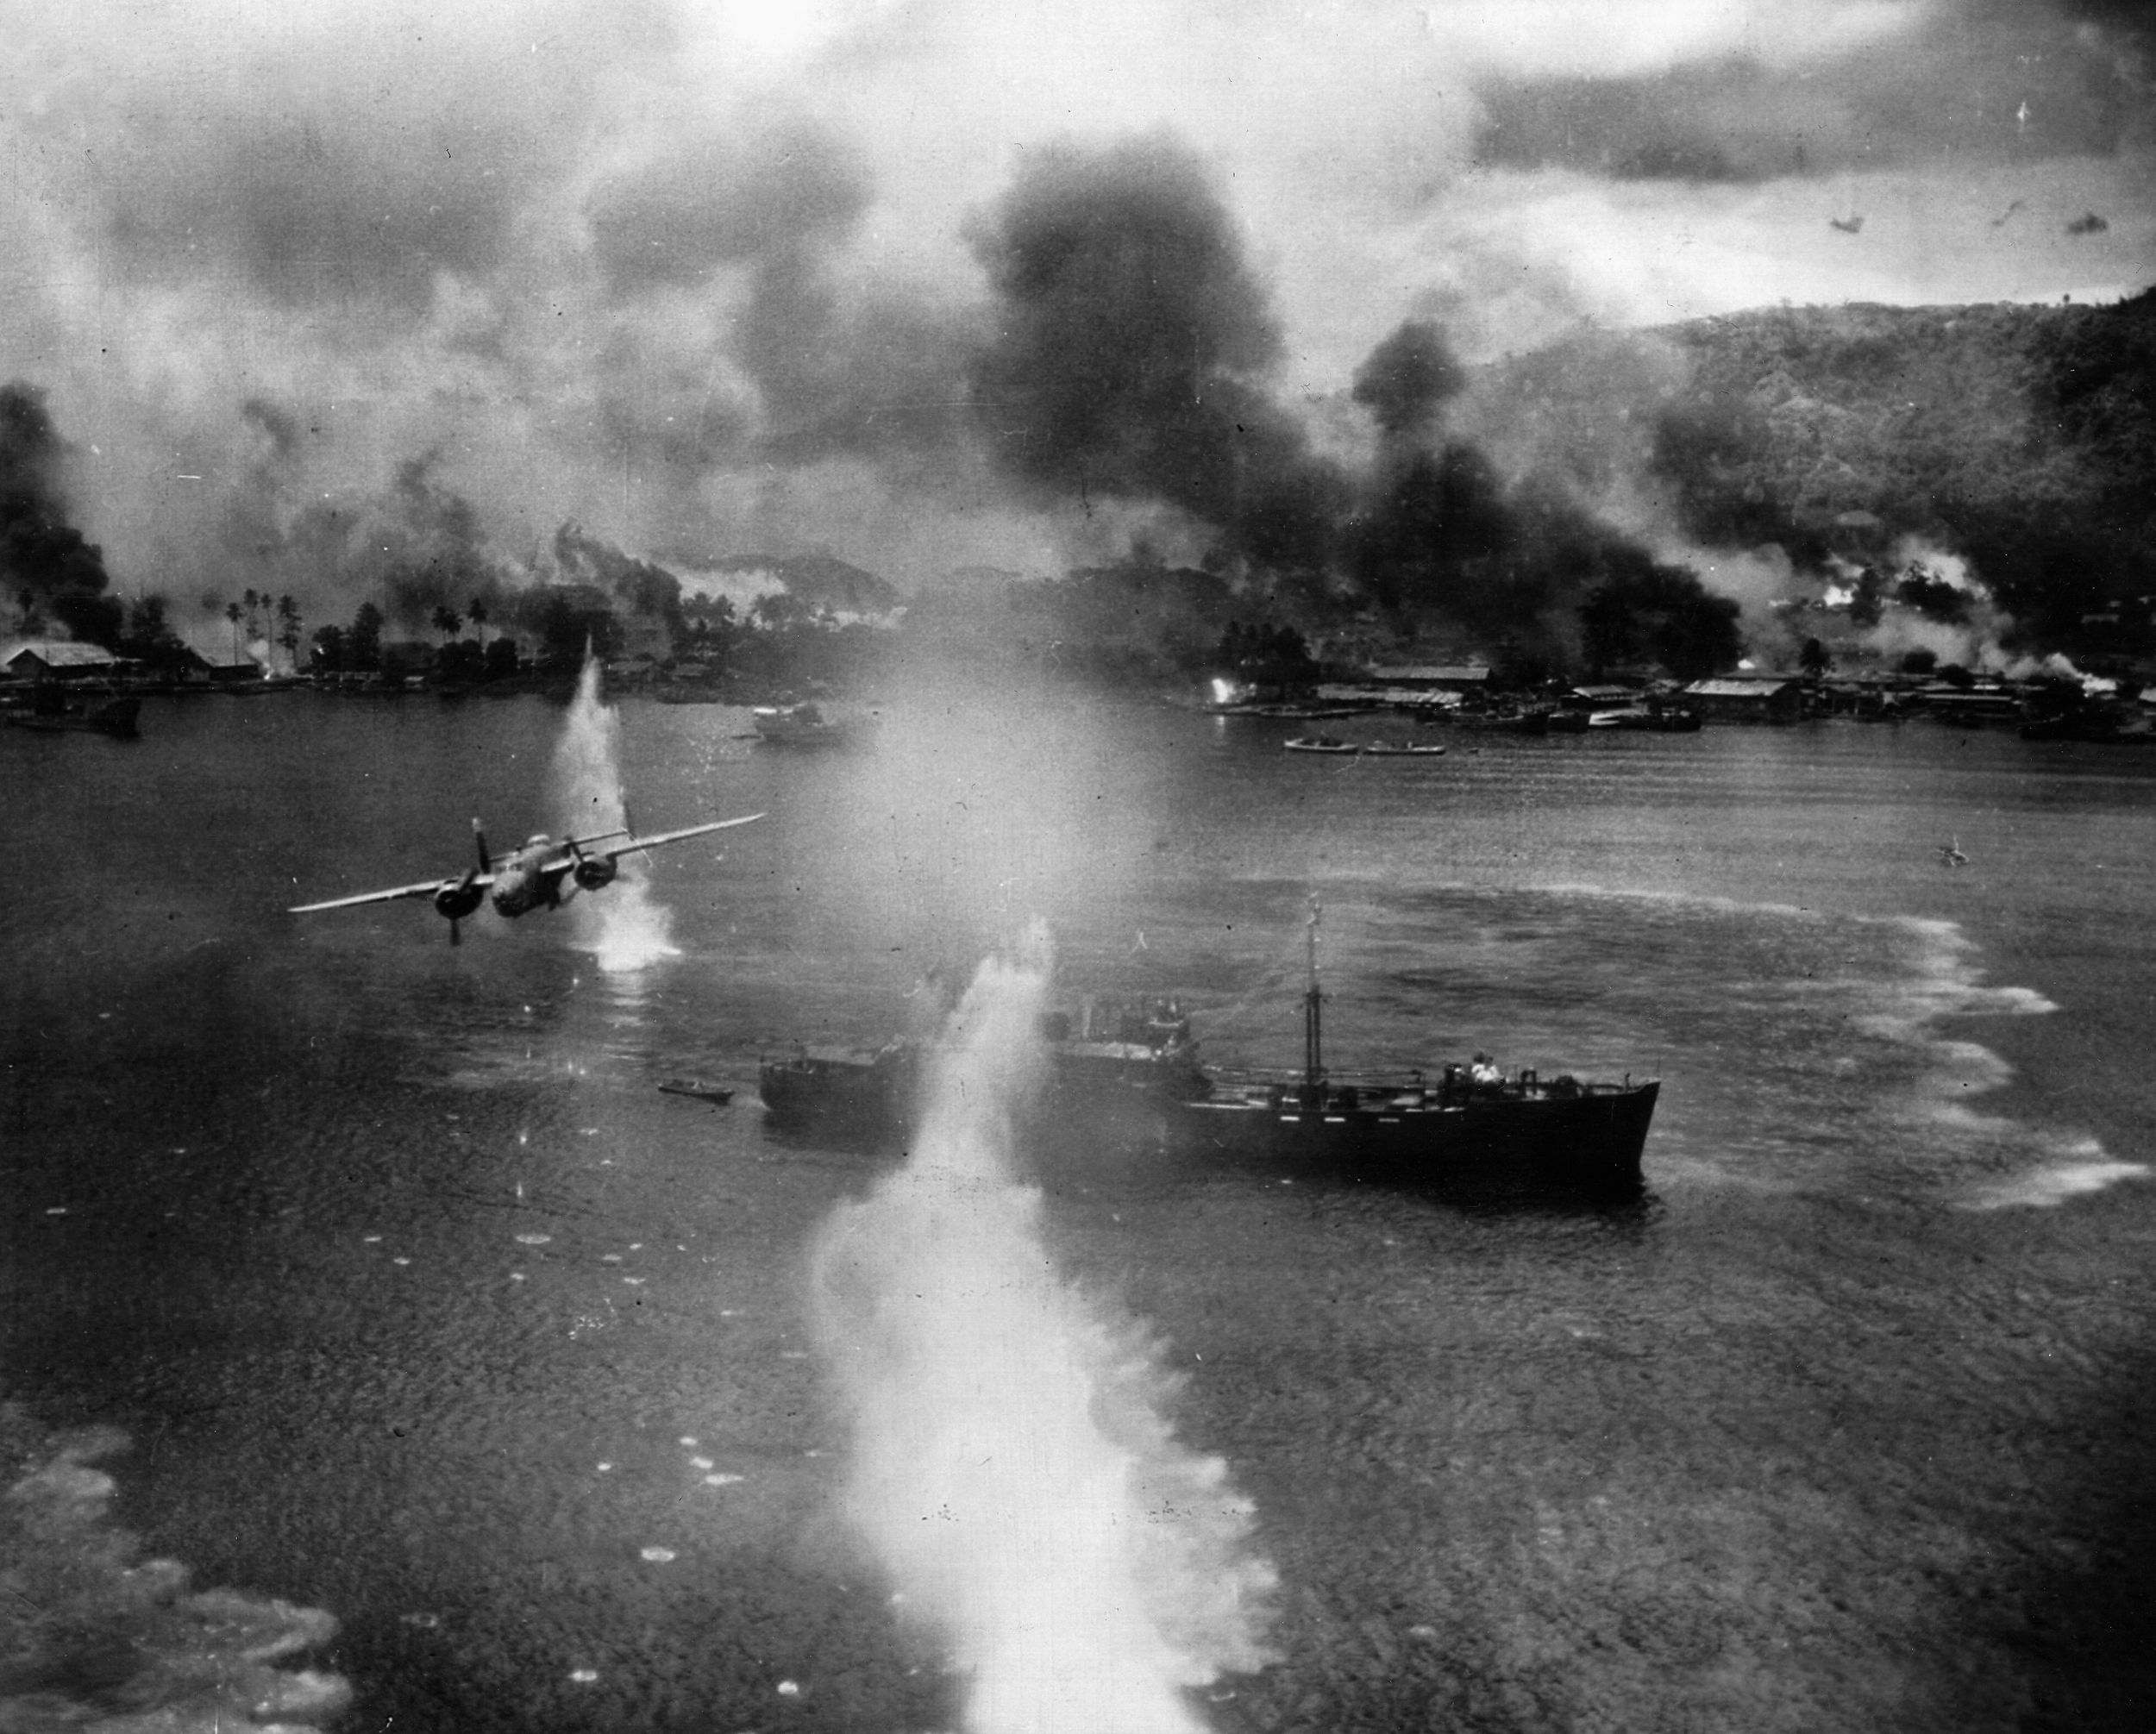 Black smoke hangs over shore installations as a U.S. B-25 bomber streaks above a Japanese merchant ship in the Rabaul harbor.